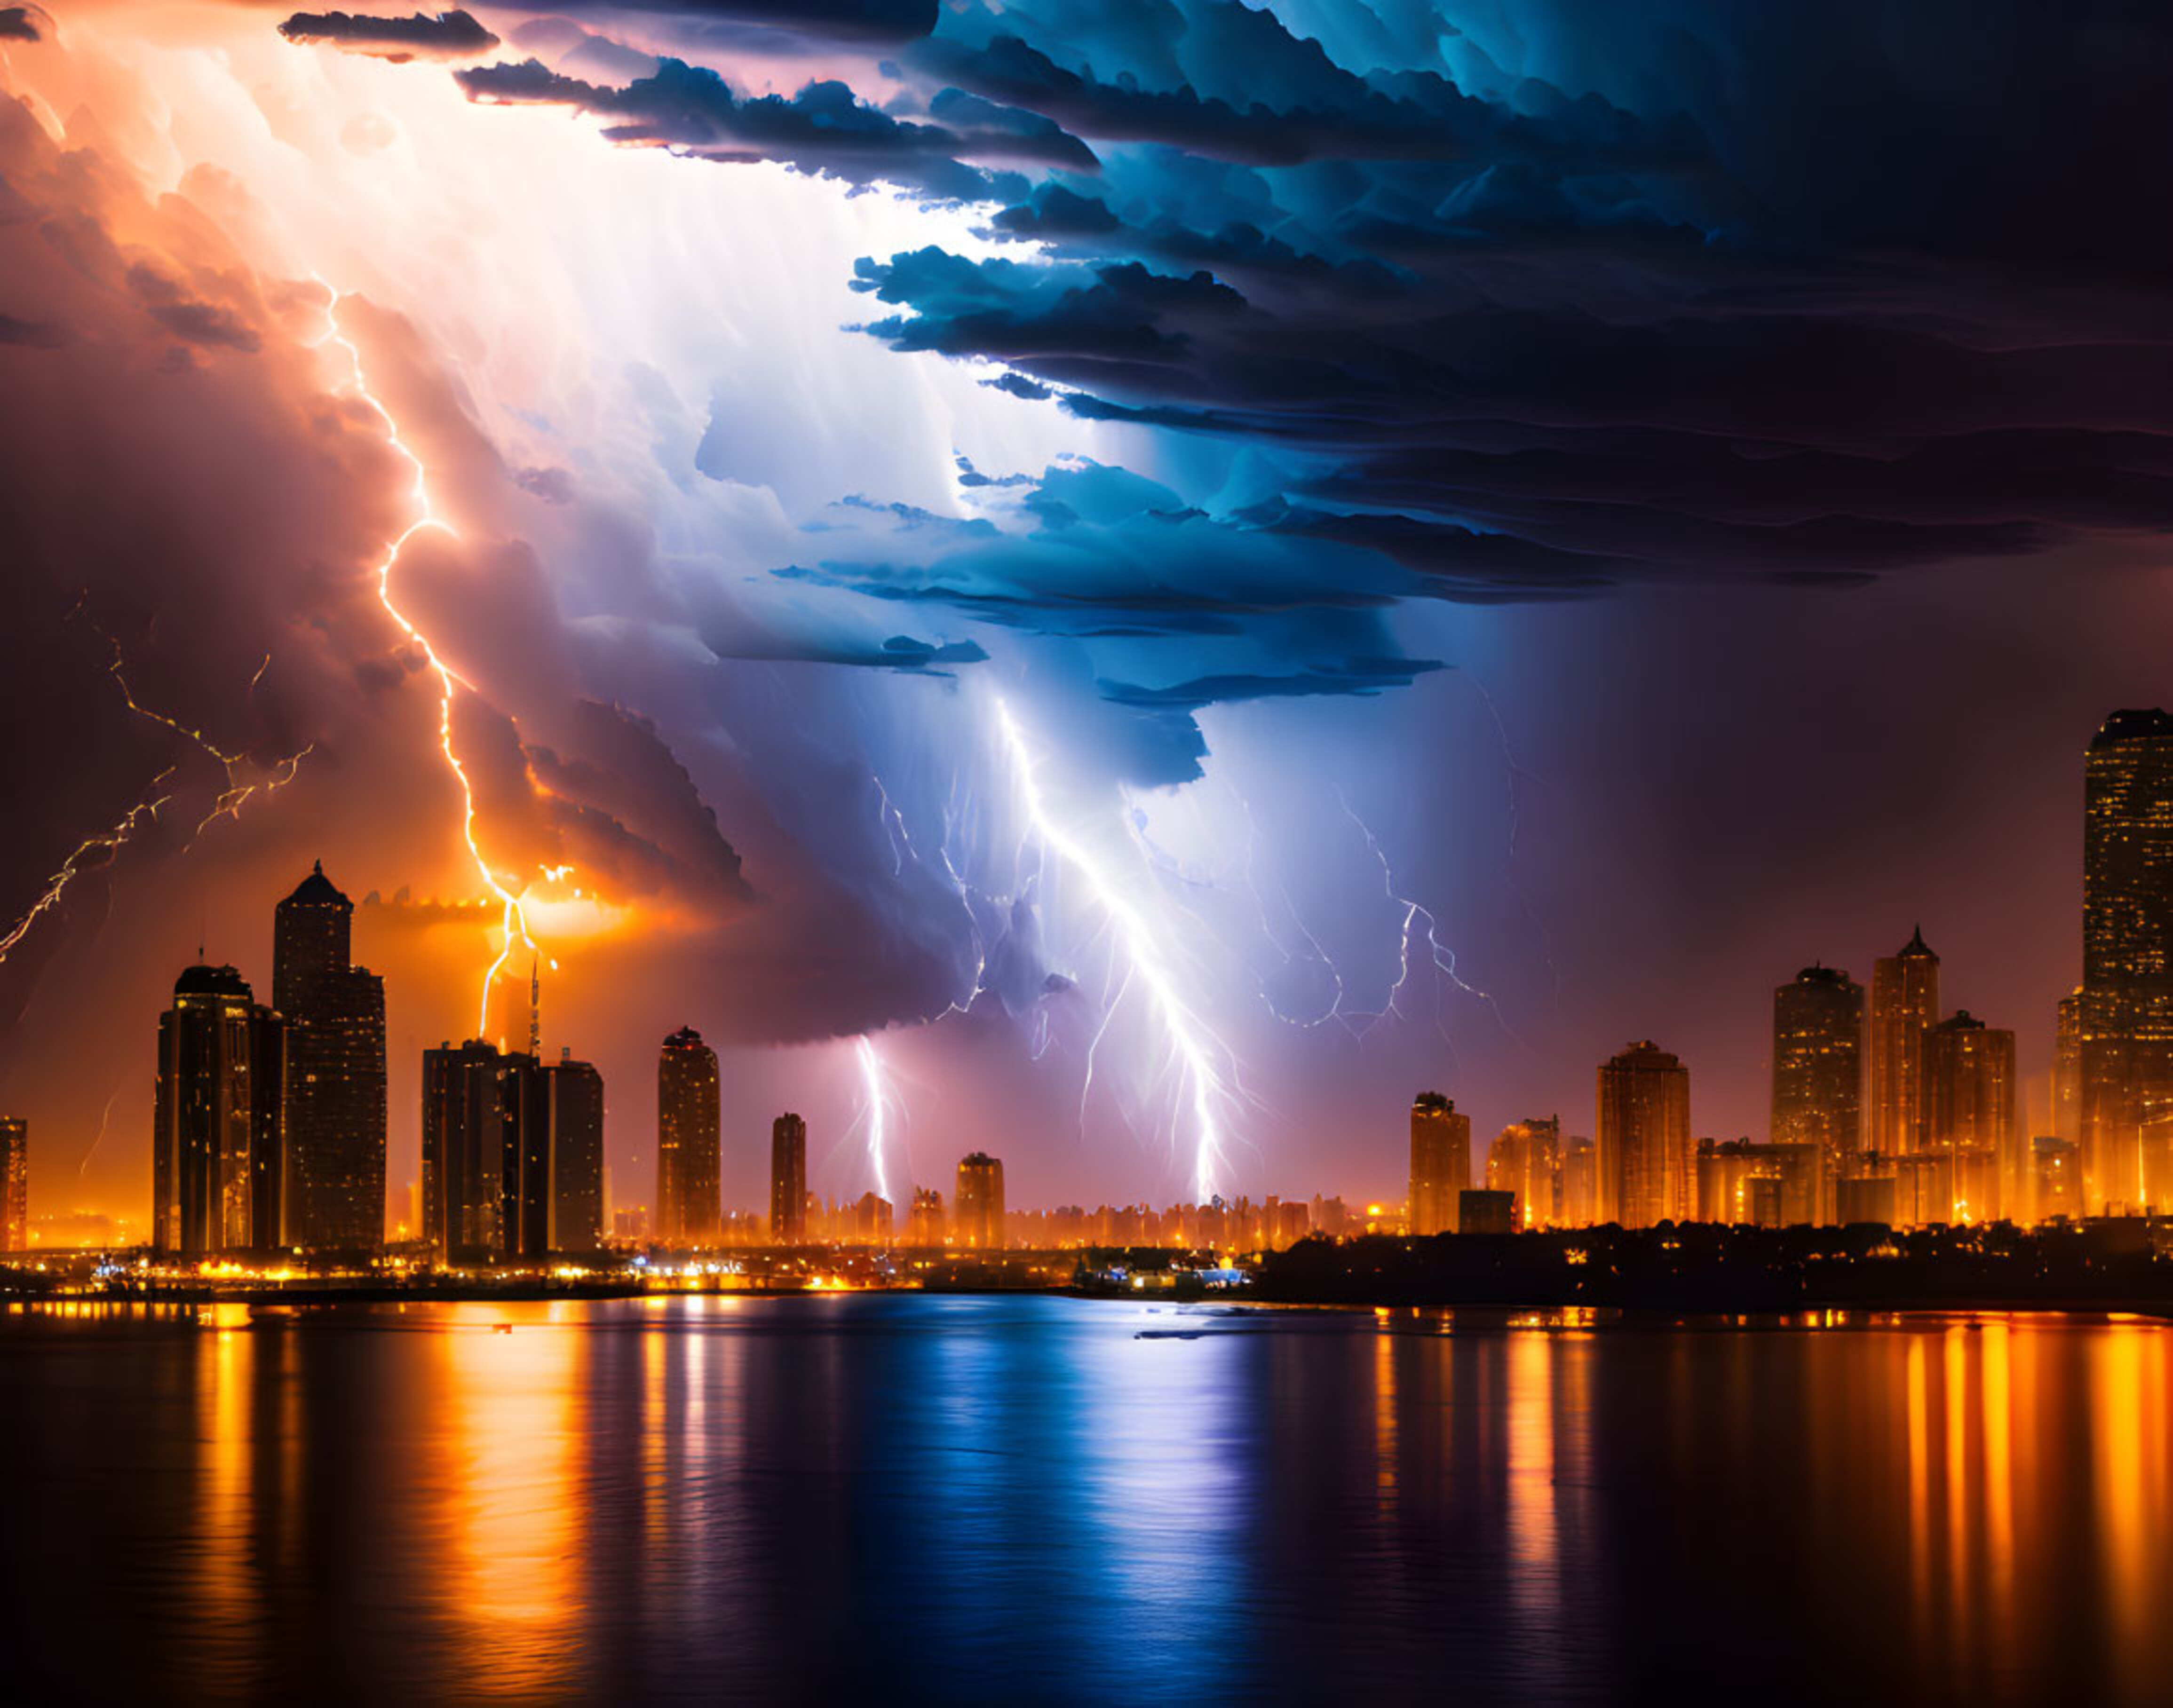 The night city and the lightning